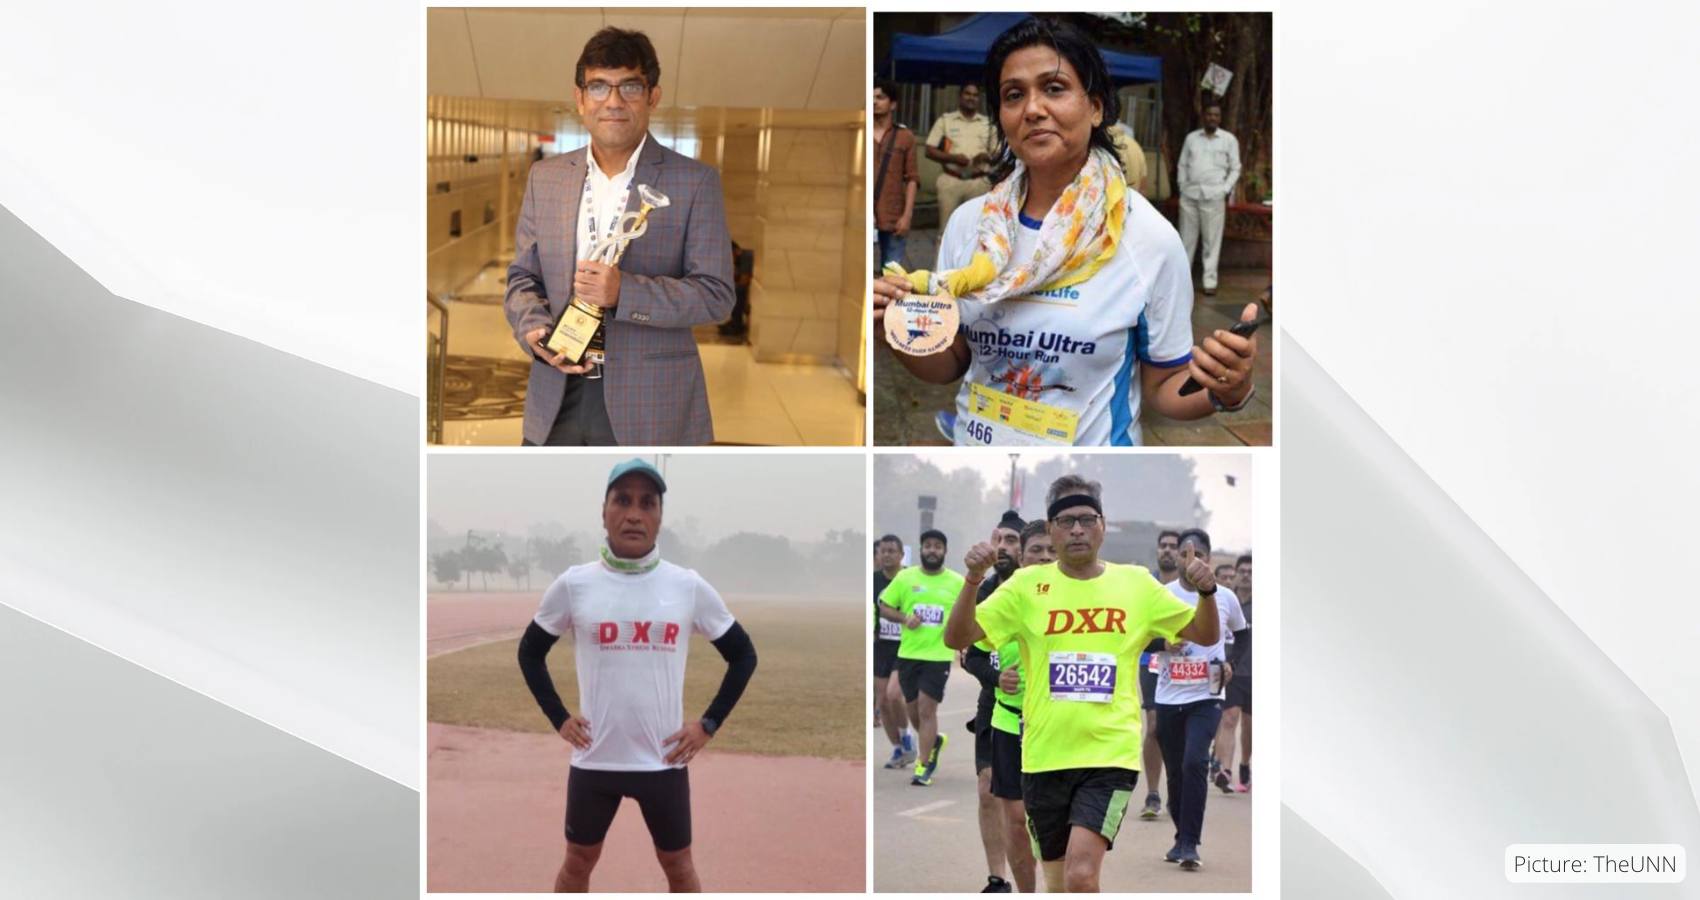 The Incredible “Everyday Elite” runners of India